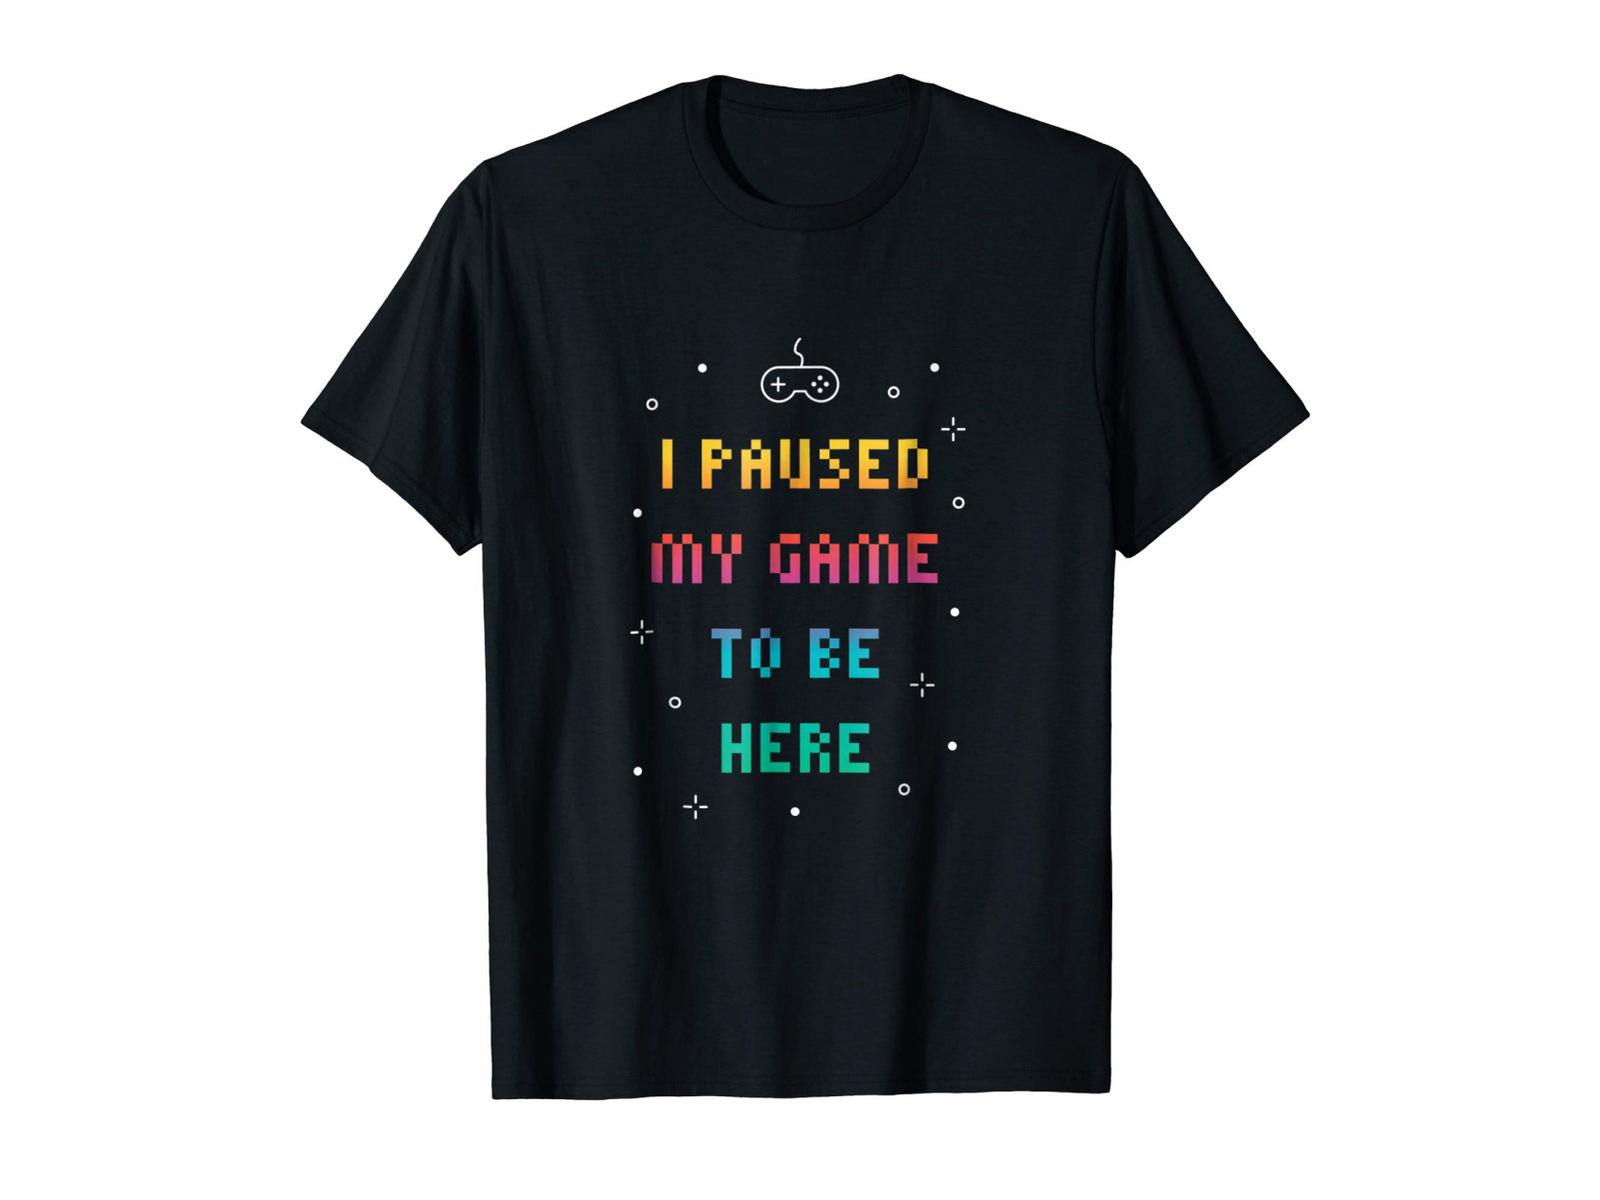 I Paused My Game To Be Here T-shirt by MadeByBono on Dribbble